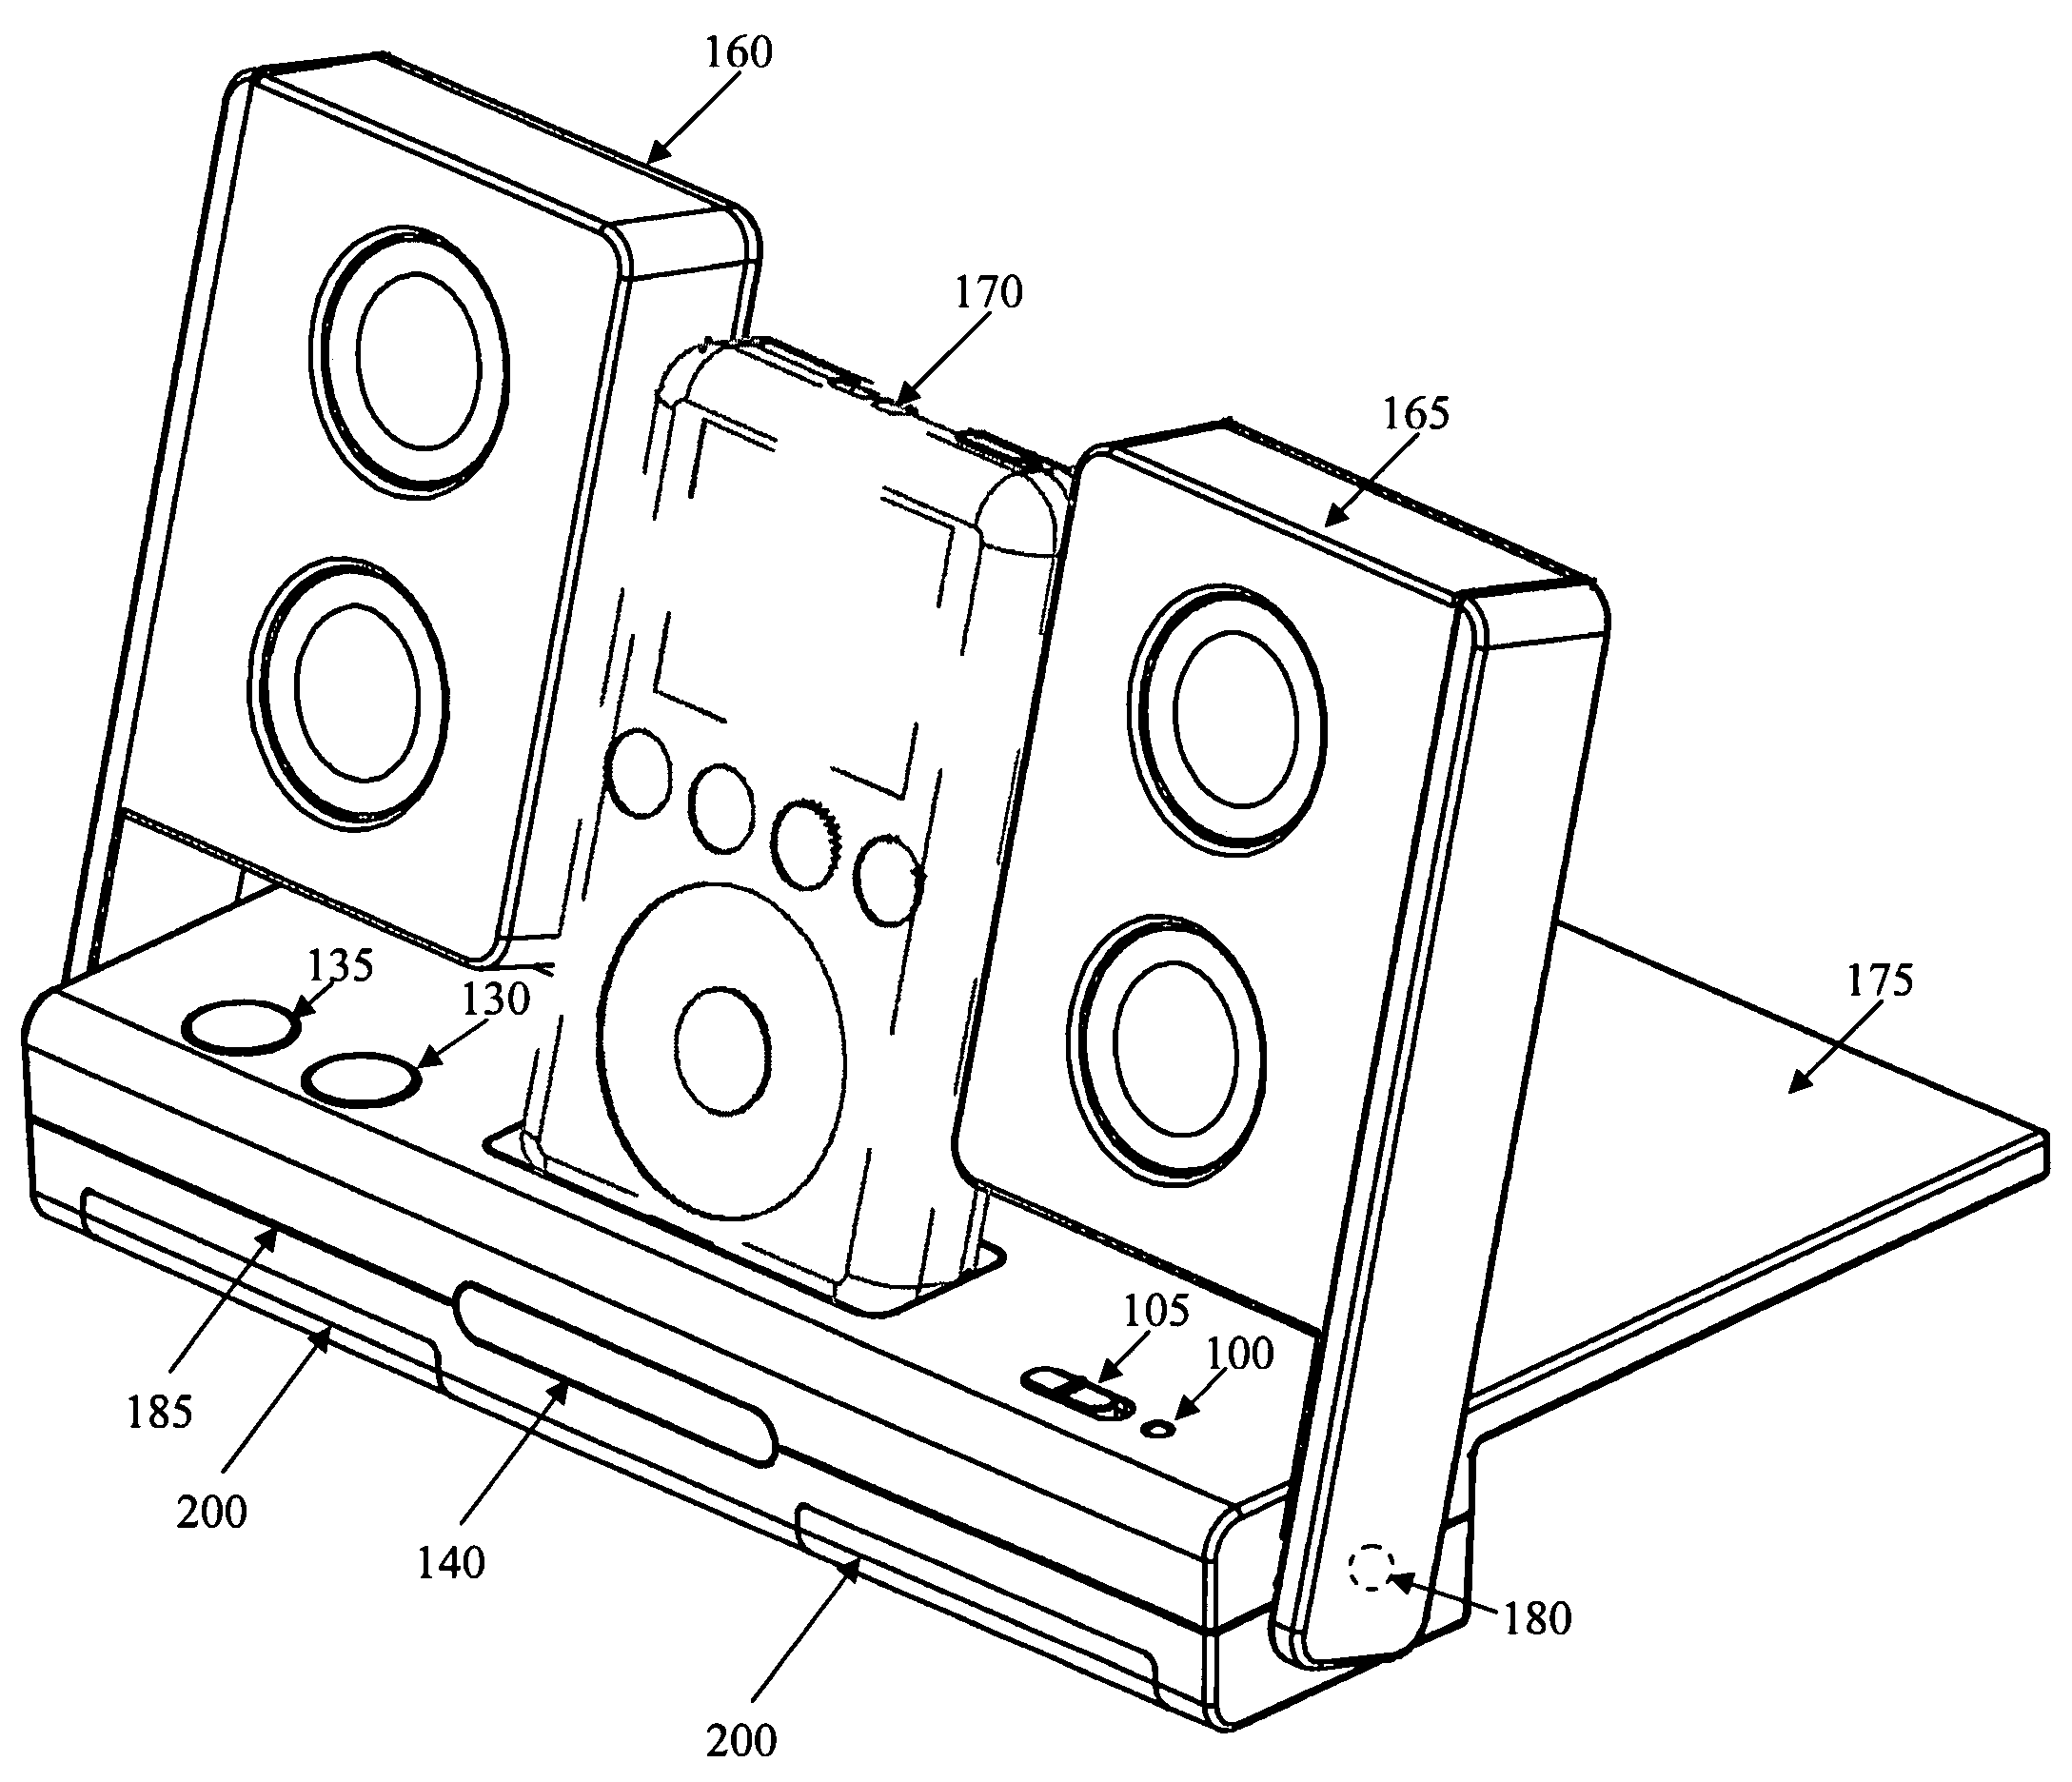 Portable audio reproduction system